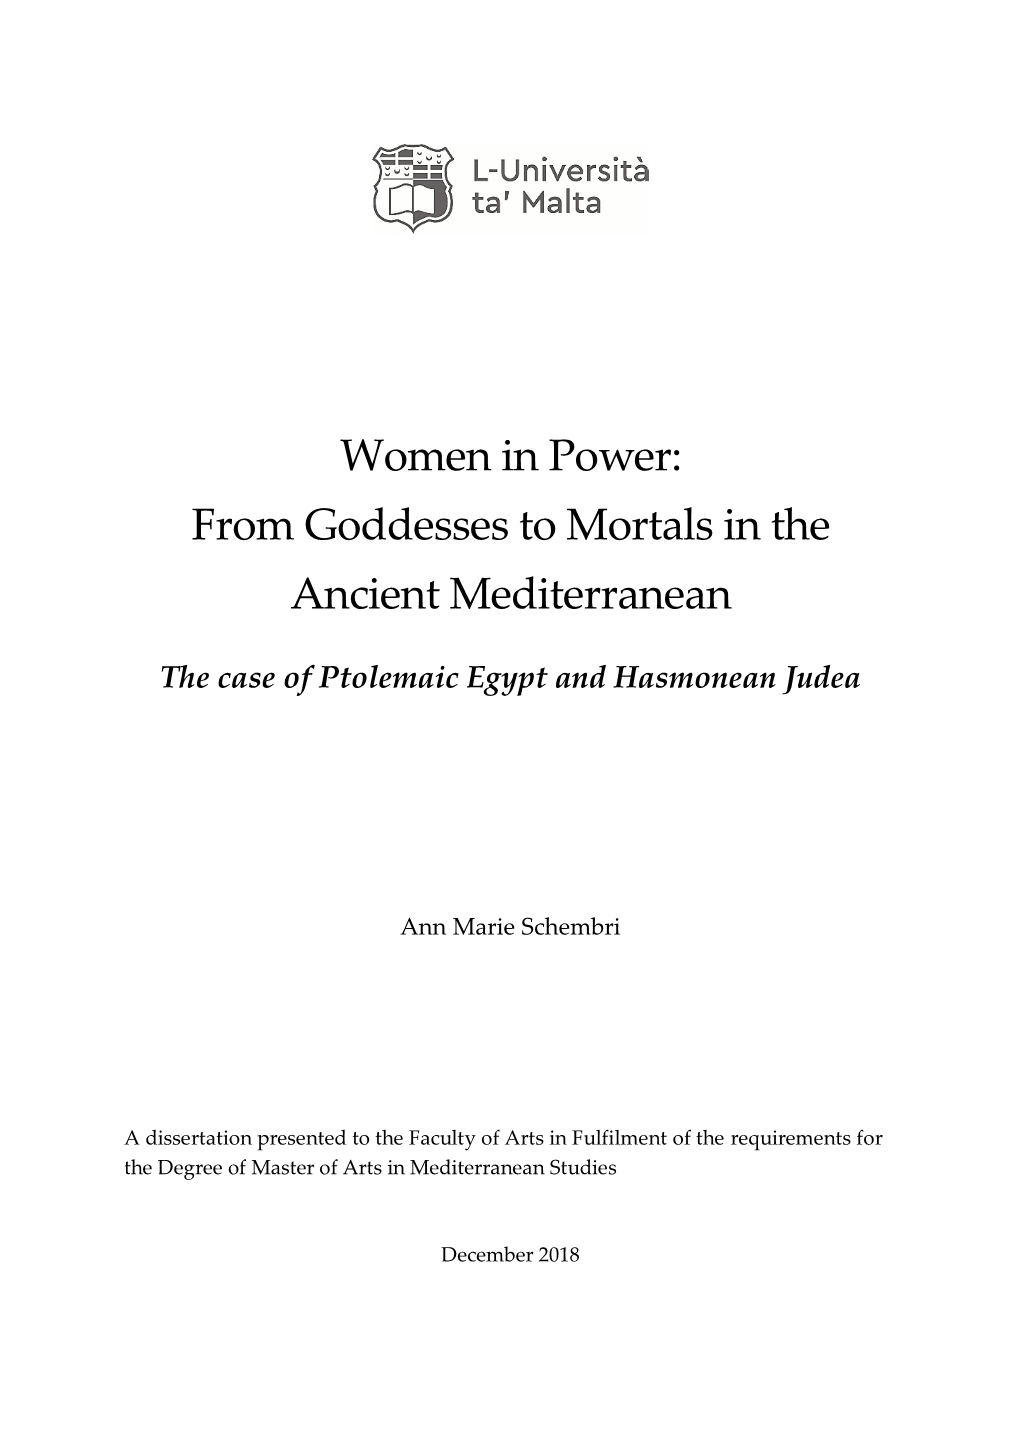 Women in Power: from Goddesses to Mortals in the Ancient Mediterranean